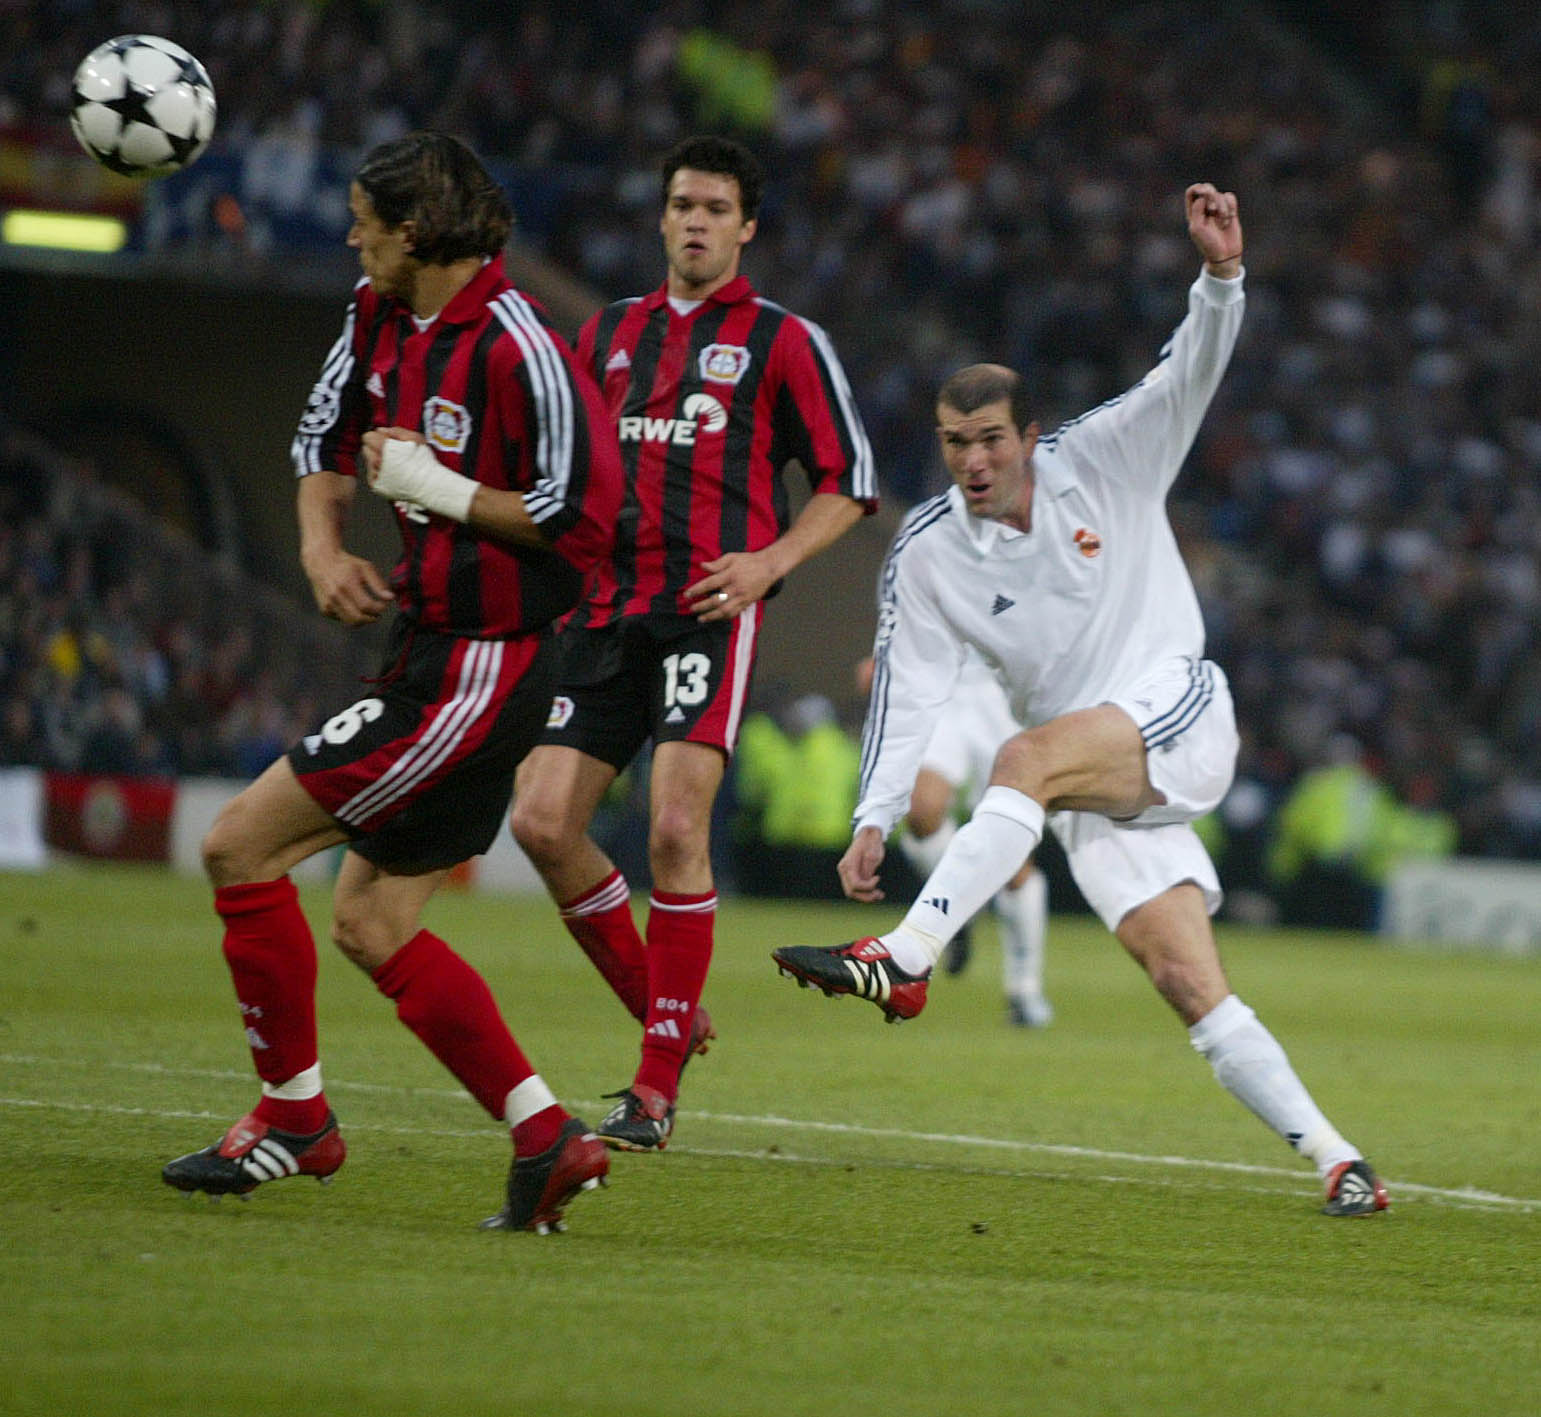 Zinedine Zidane volleys home a goal widely considered one of the greatest of all time.